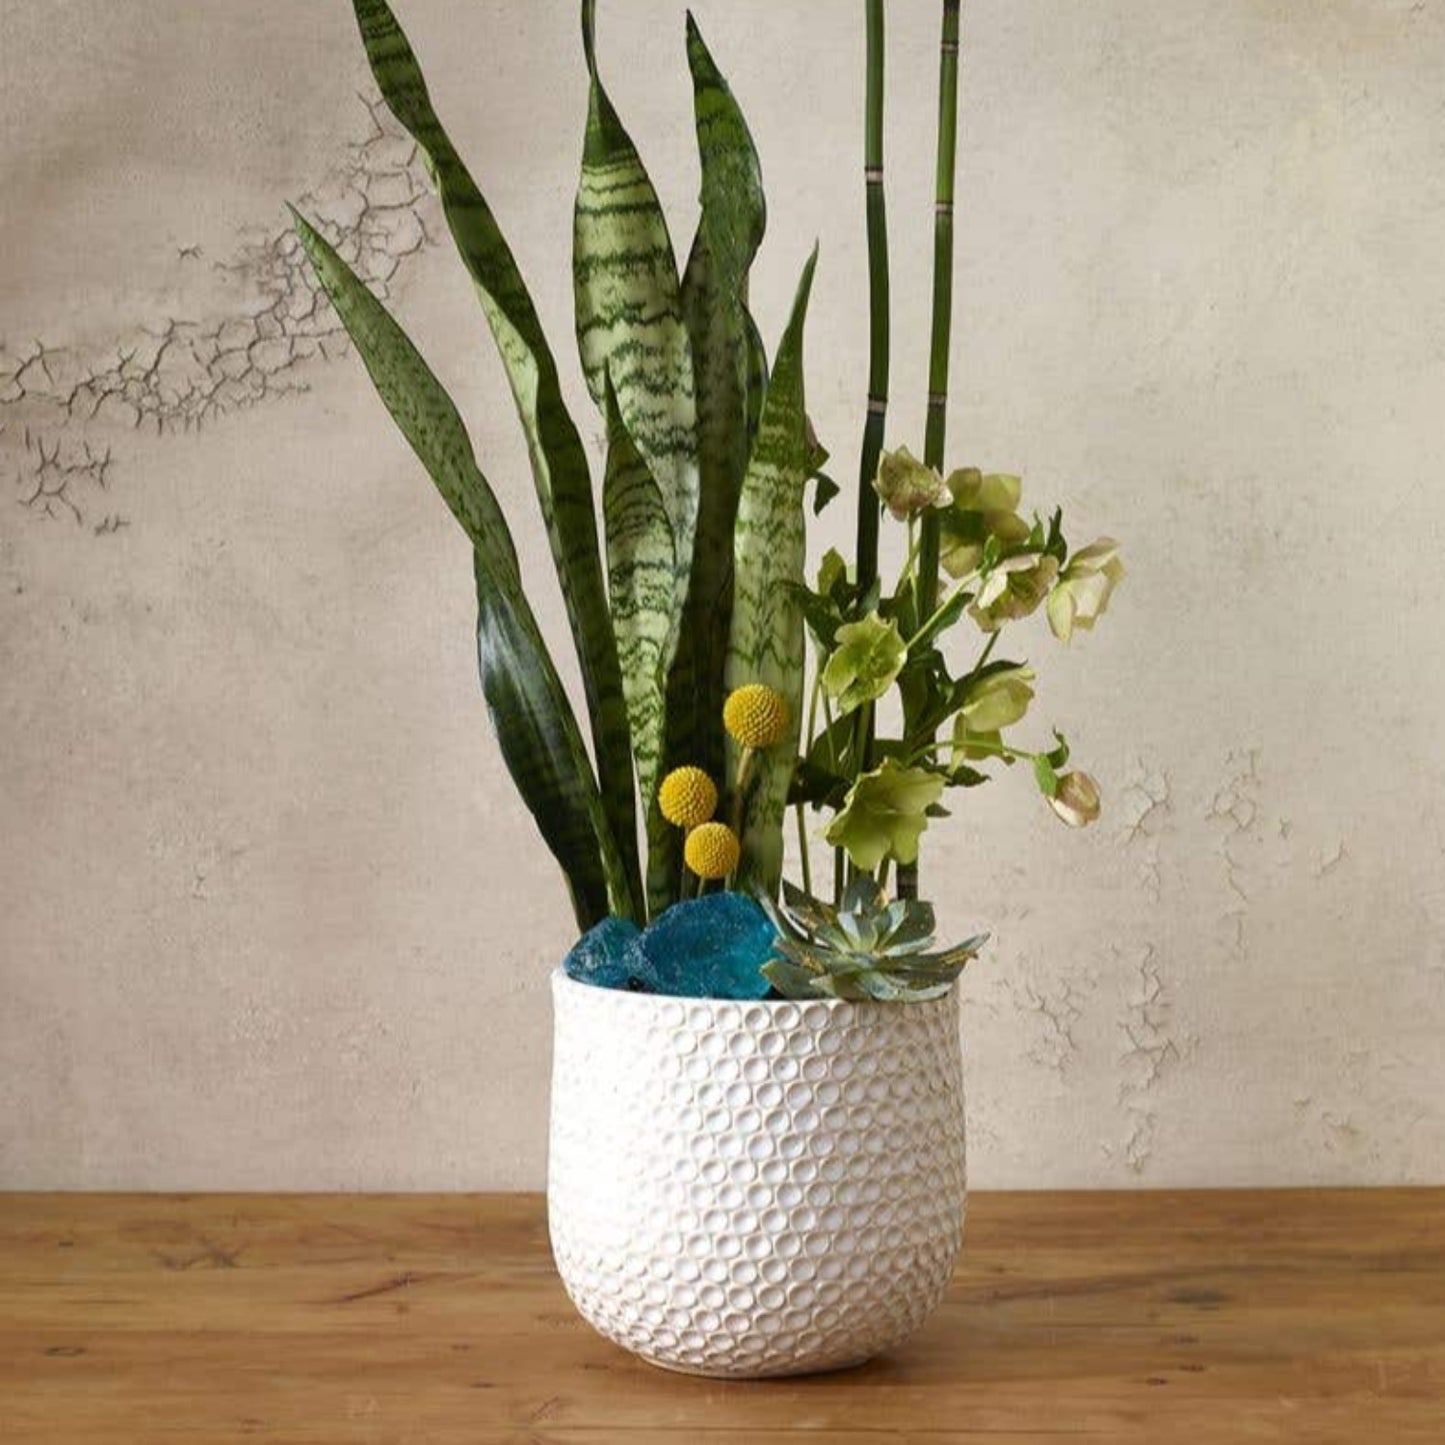 plant lover,white pot,ceramic,white glazed finish,durable,fits a 6 inch drop in plant,perfect for an orchid,dot textured design,ceramic planter